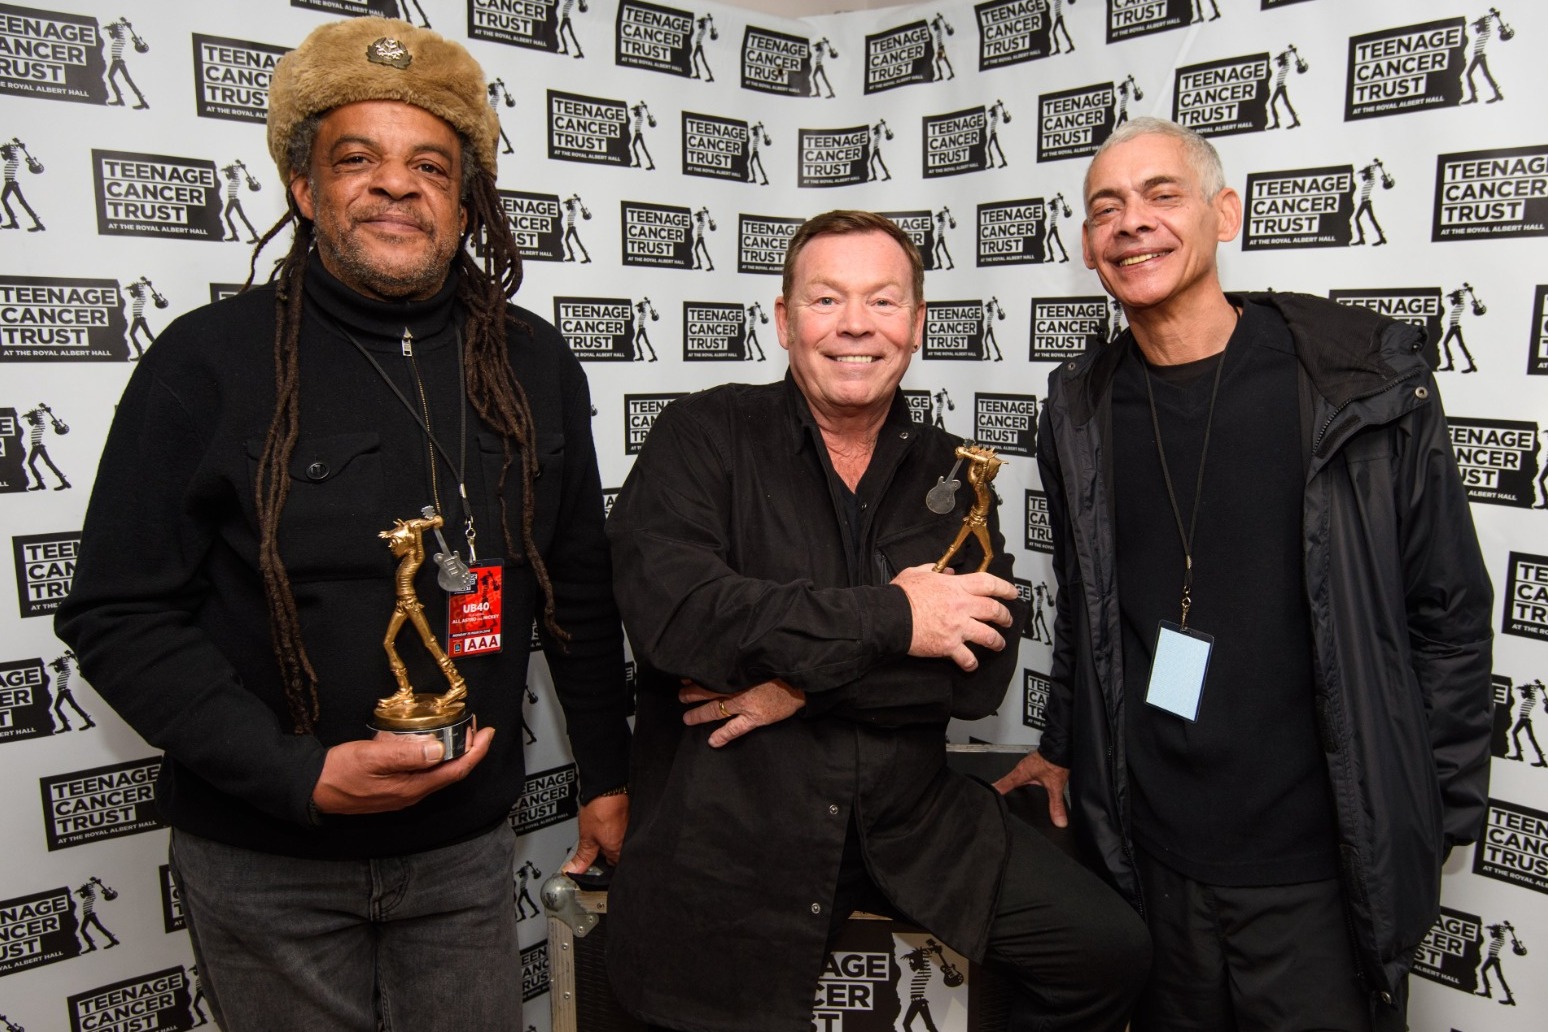 UB40 star Ali Campbell to ‘tear roof off’ O2 during Storm Eunice reopening gig 